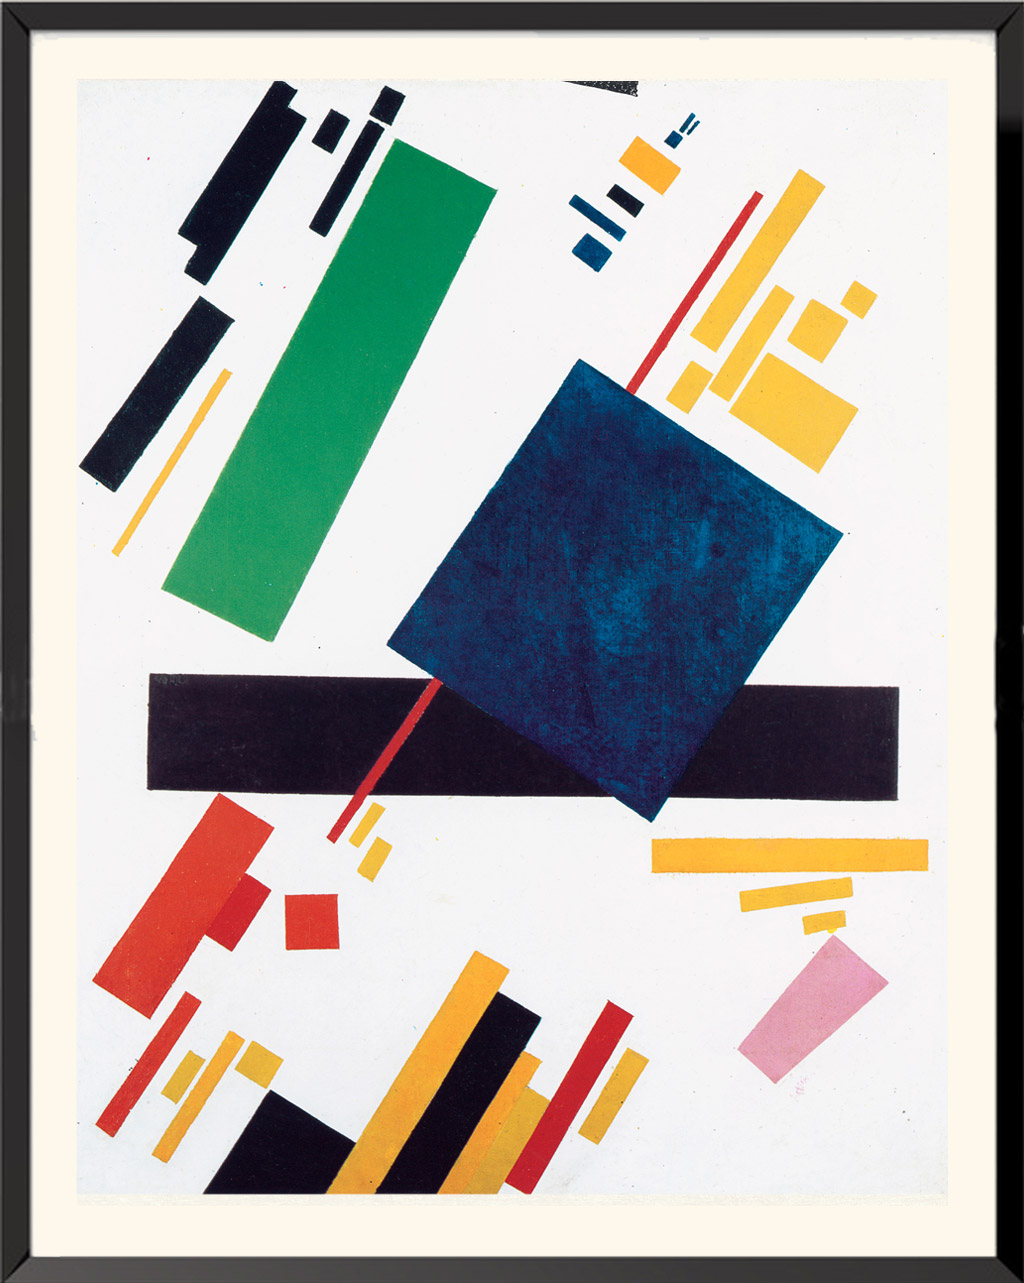 Suprematist painting by Kasimir Malevitch